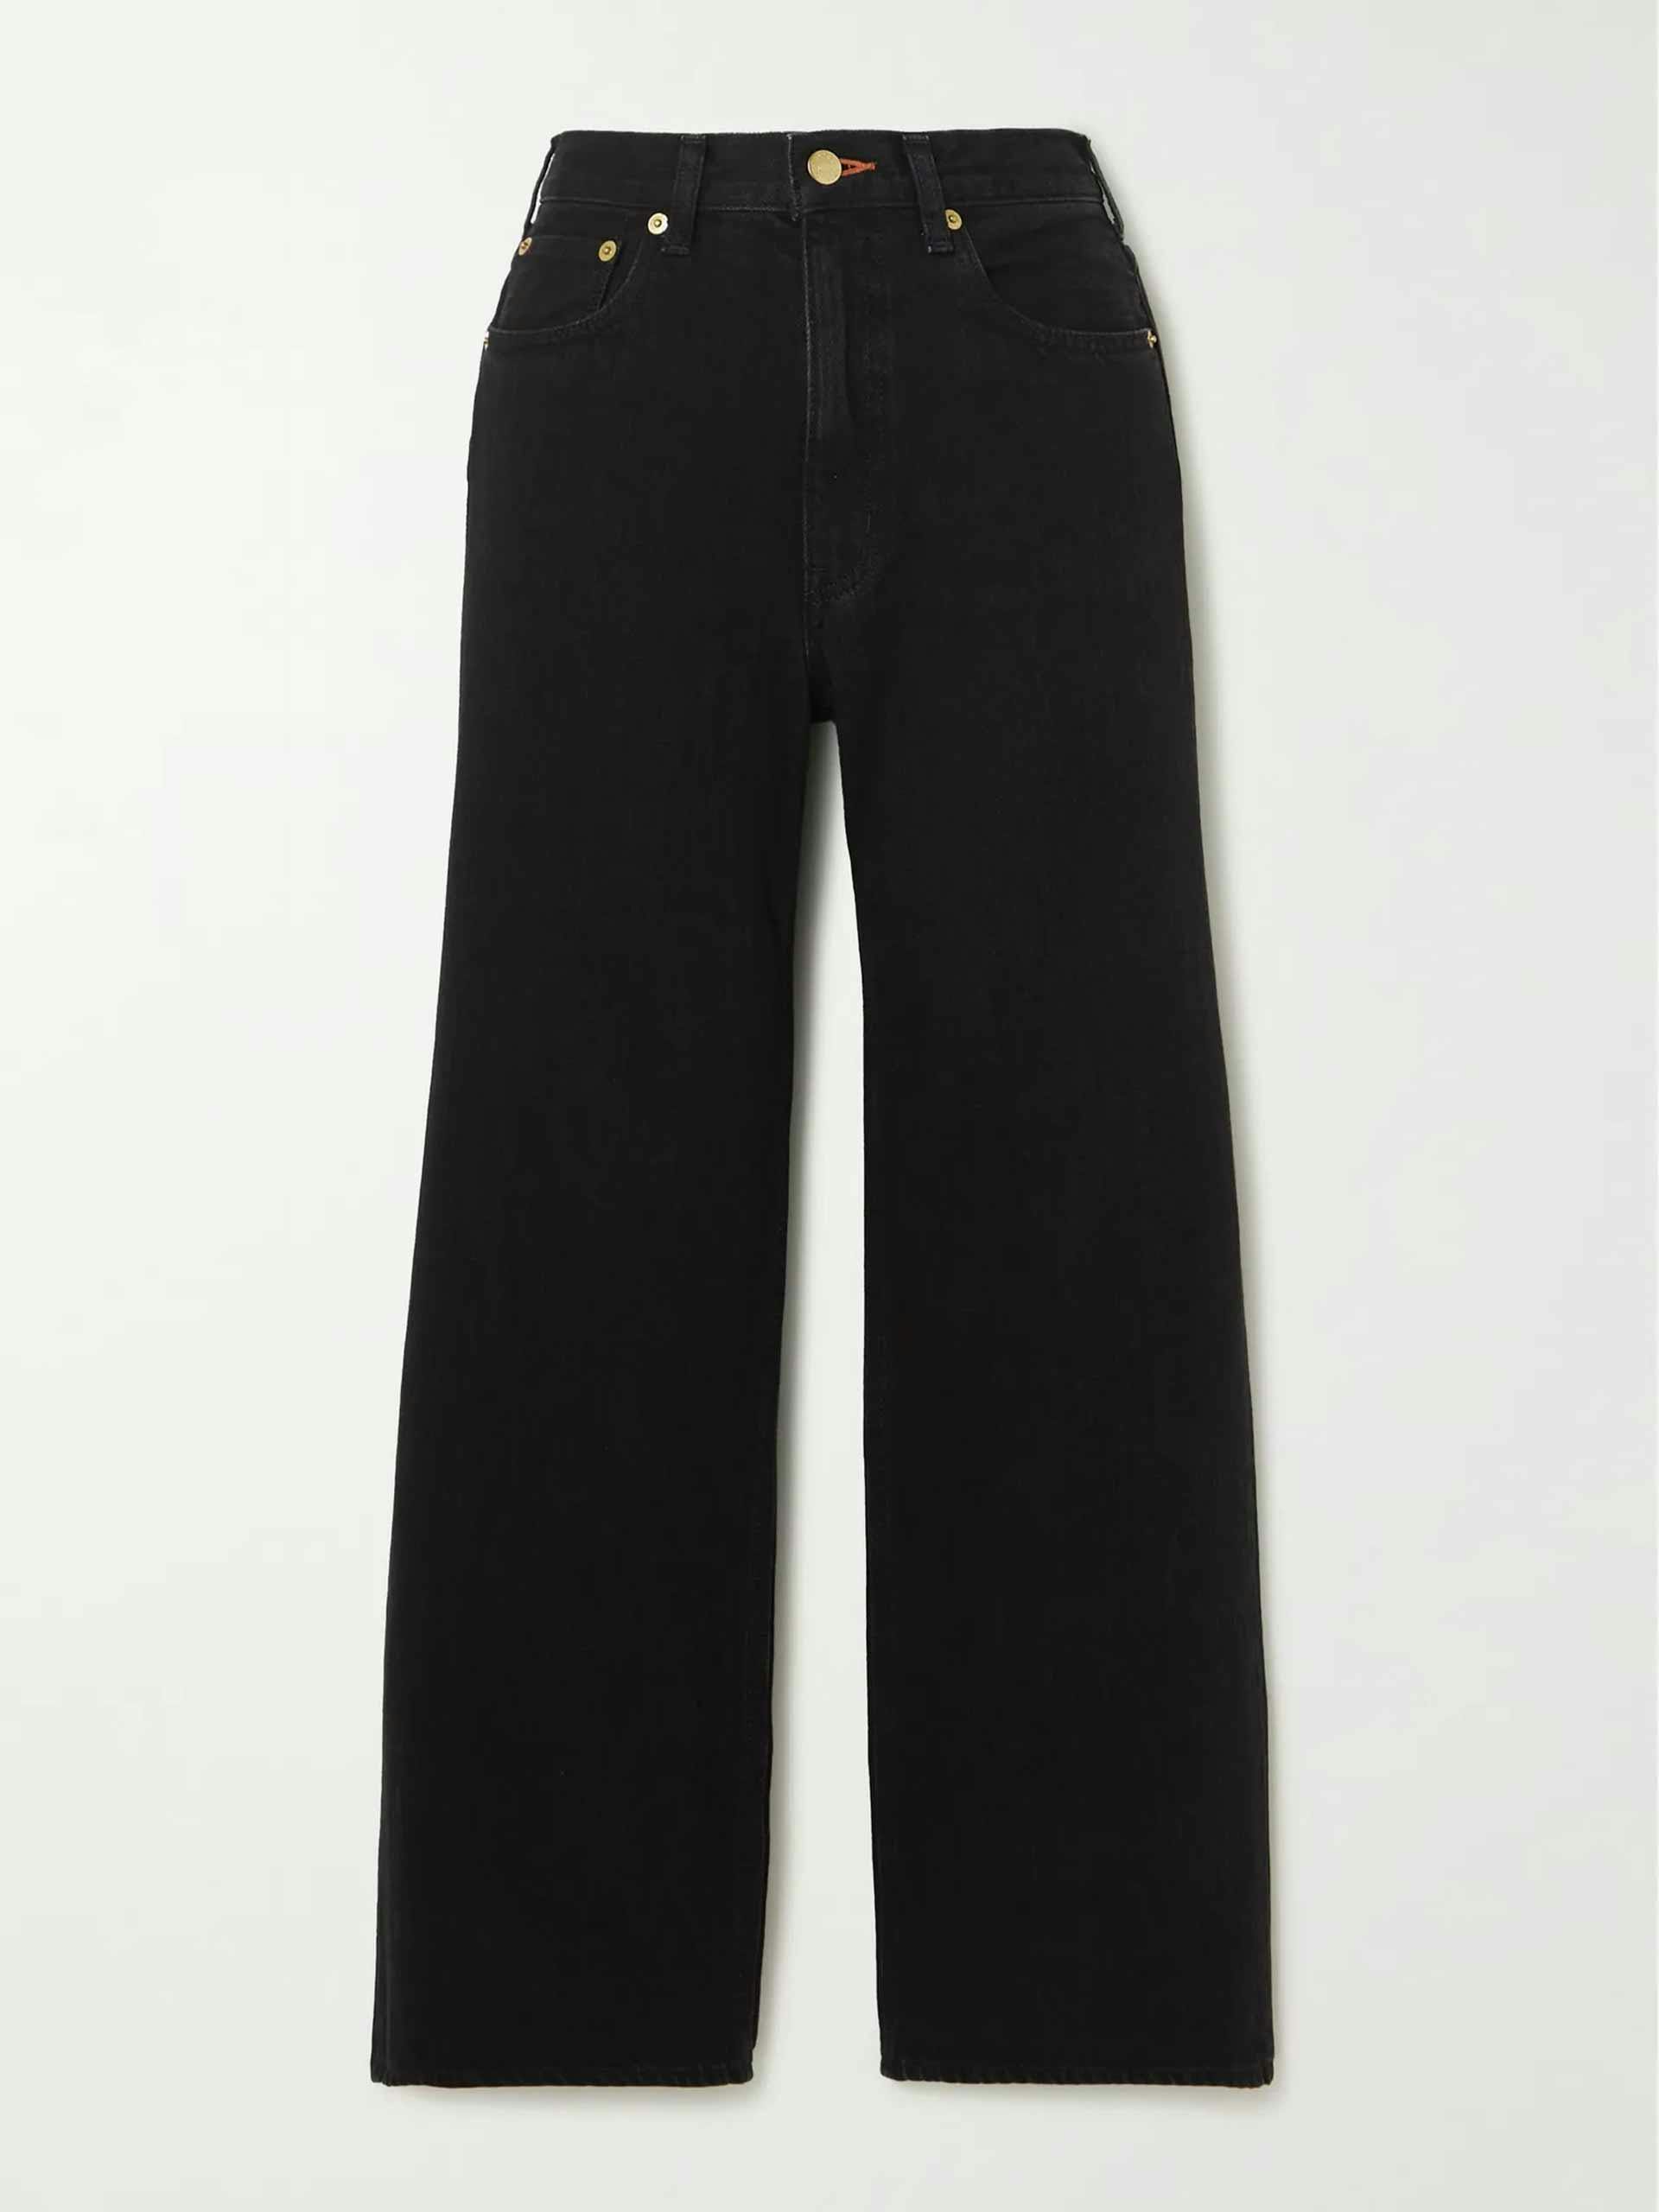 Black cropped high-rise wide-leg jeans